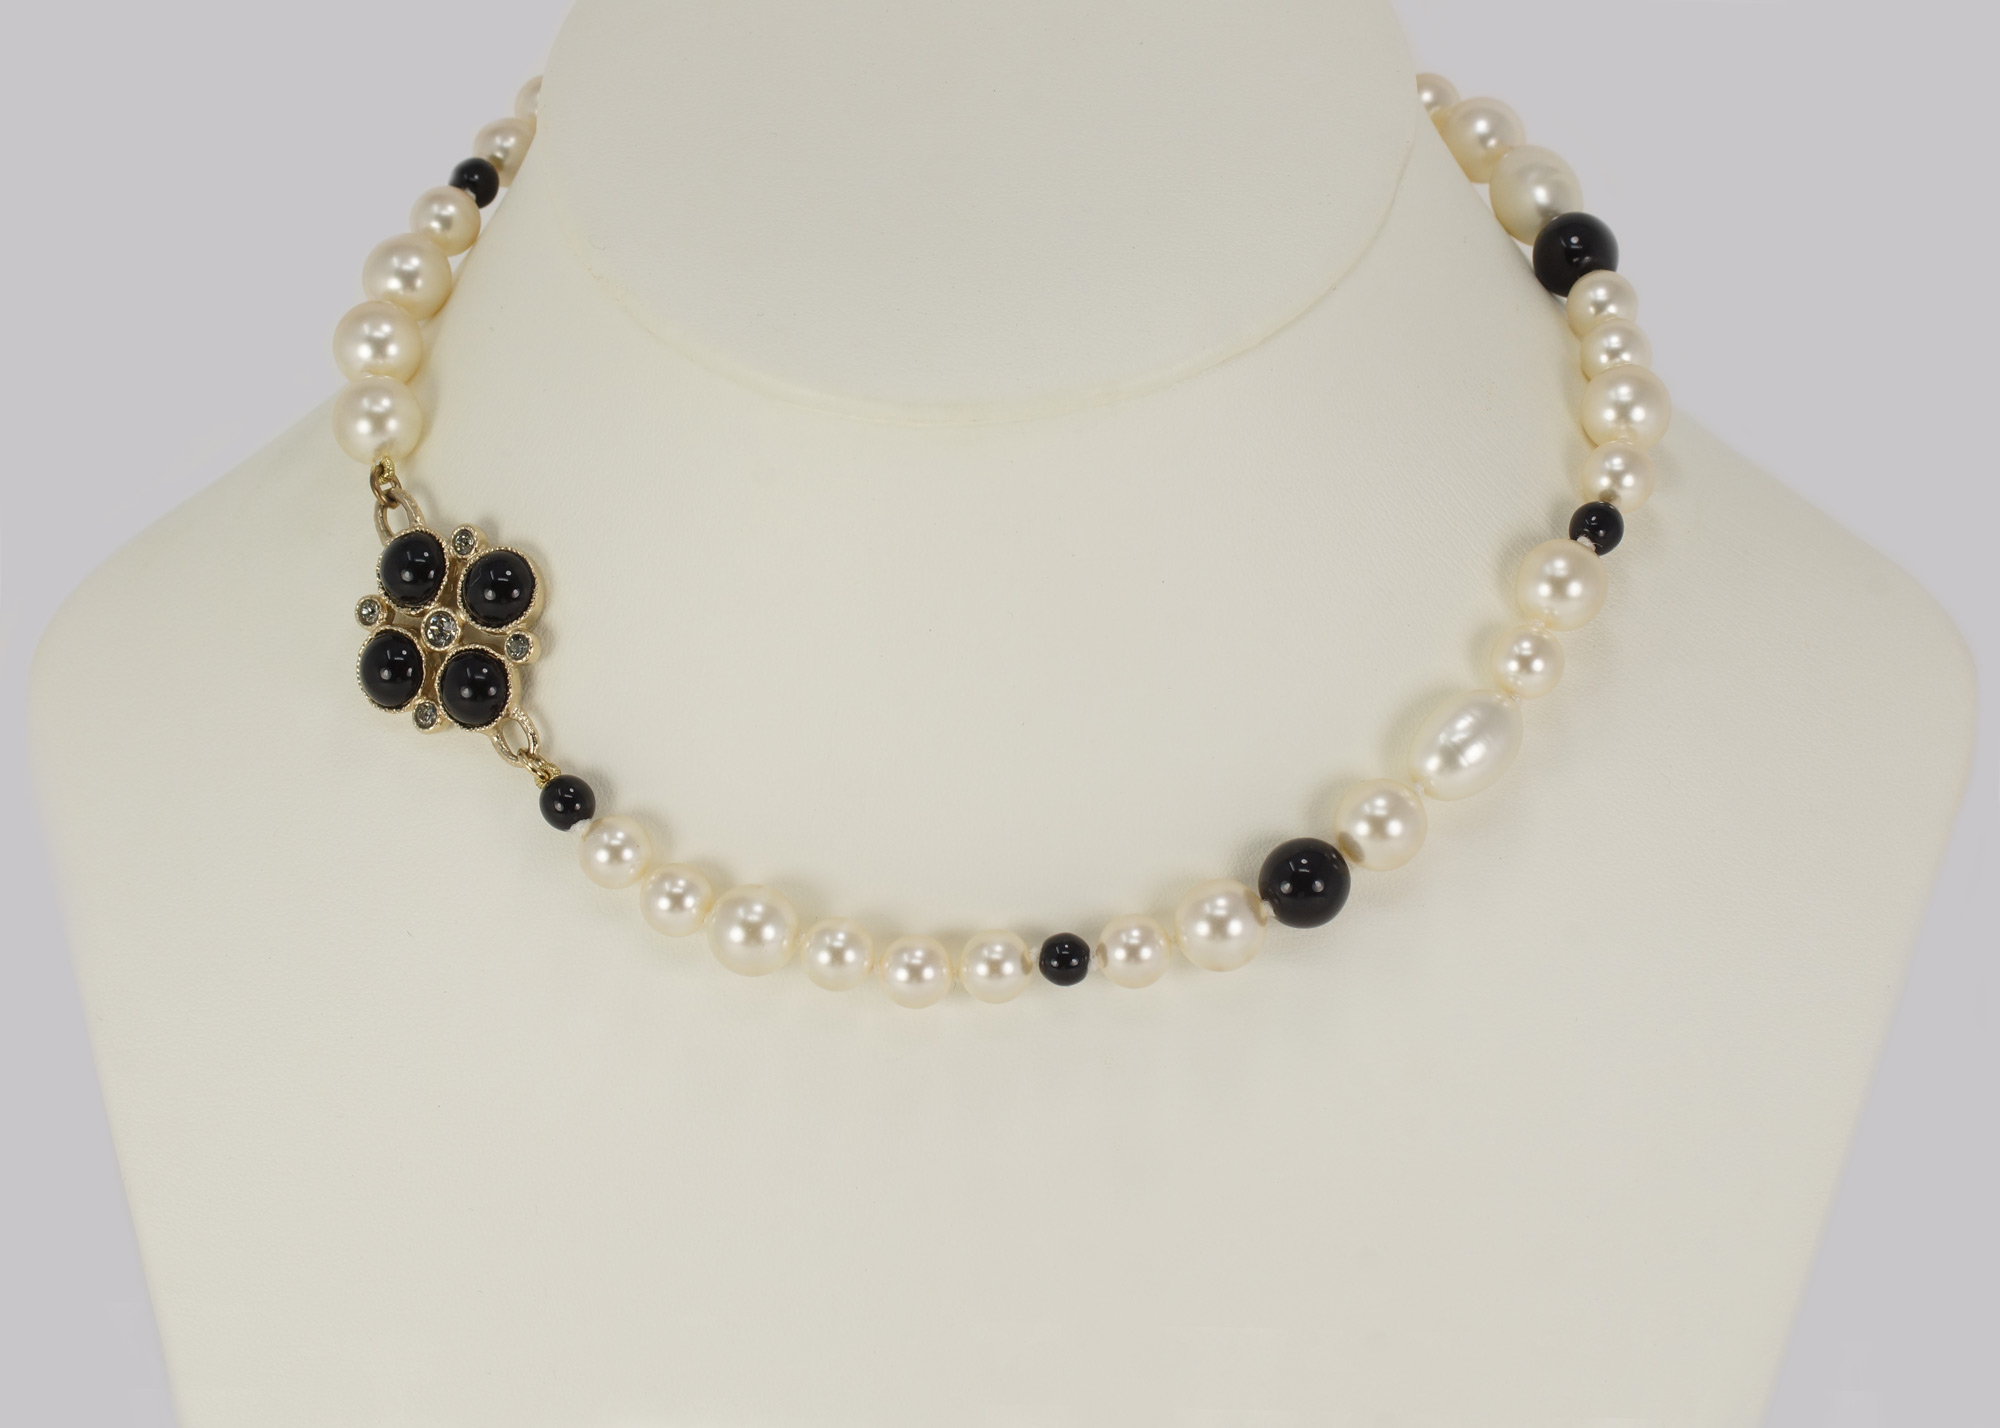 Chanel Pearl Necklace Black Bead & Crystal - The Chelsea Bijouterie paula